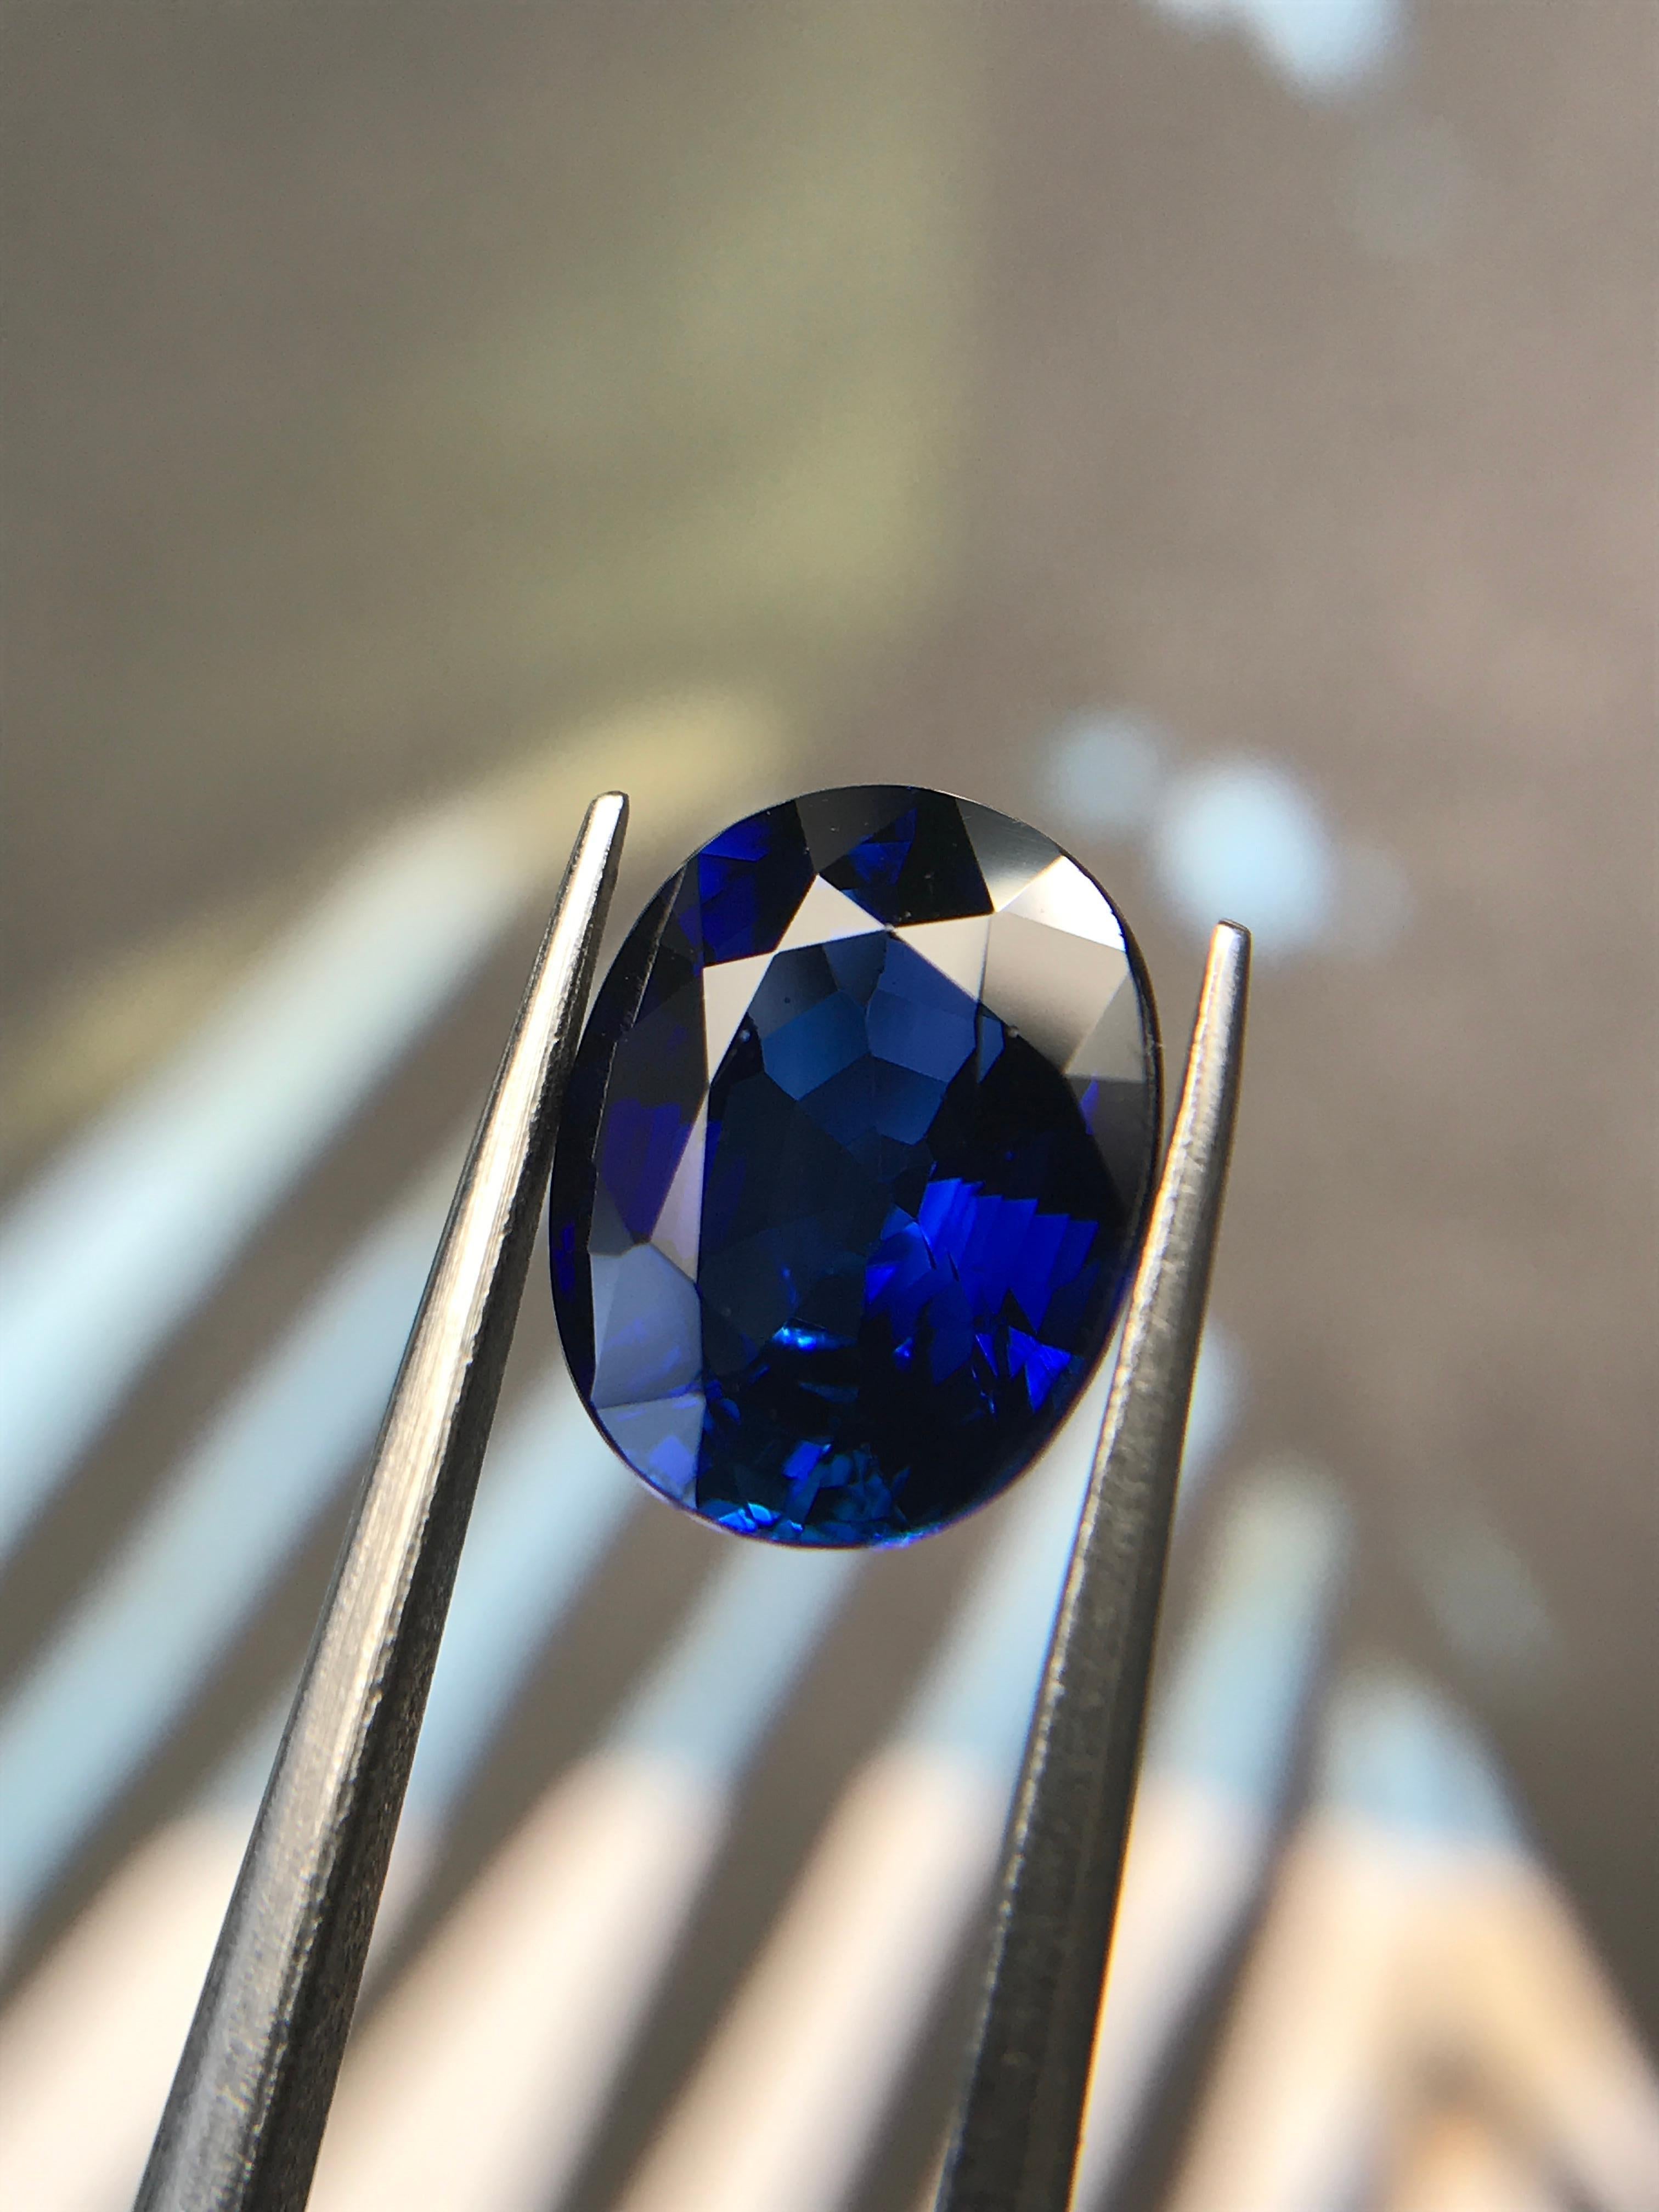 Dazzling 2.88 carat natural oval sapphire in rich royal blue colour perfect for a timeless jewellery piece.

We specialise in colour gemstones and offer a bespoke jewellery service. The production time for bespoke pieces is usually 4-8 weeks from